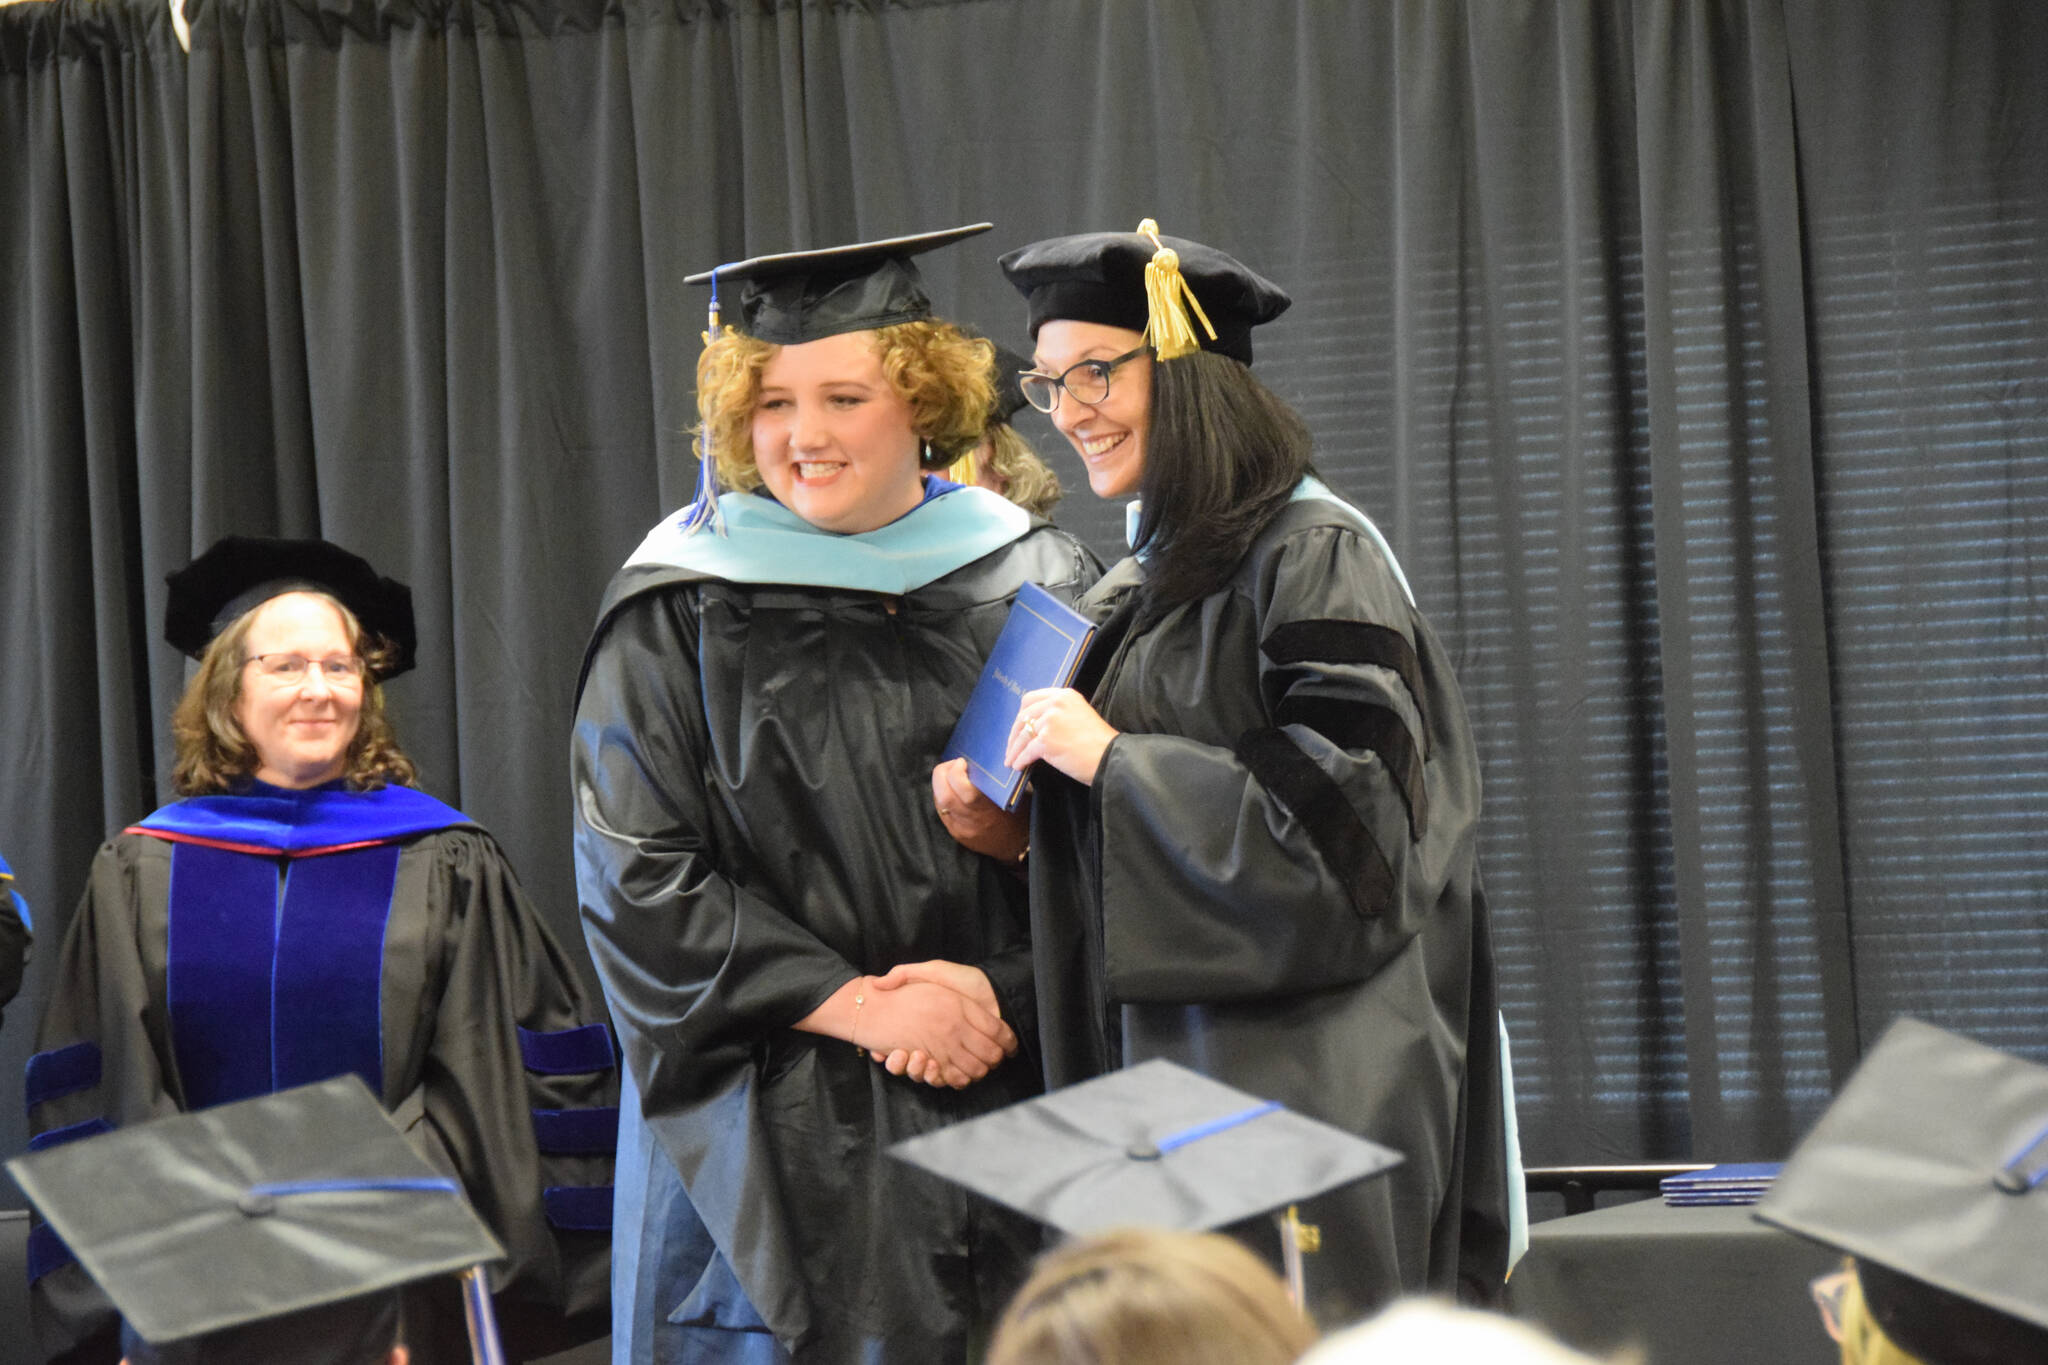 University of Alaska Southeast’s Dr. Christine Ermold (right) presents Rachel Ostler with her diploma and master’s hood during the 2023 KBC Commencement on Wednesday, May 10, 2023 in Homer, Alaska. Ostler completed her Master of Arts degree in Education through UAS. (Photo by Delcenia Cosman/Homer News)